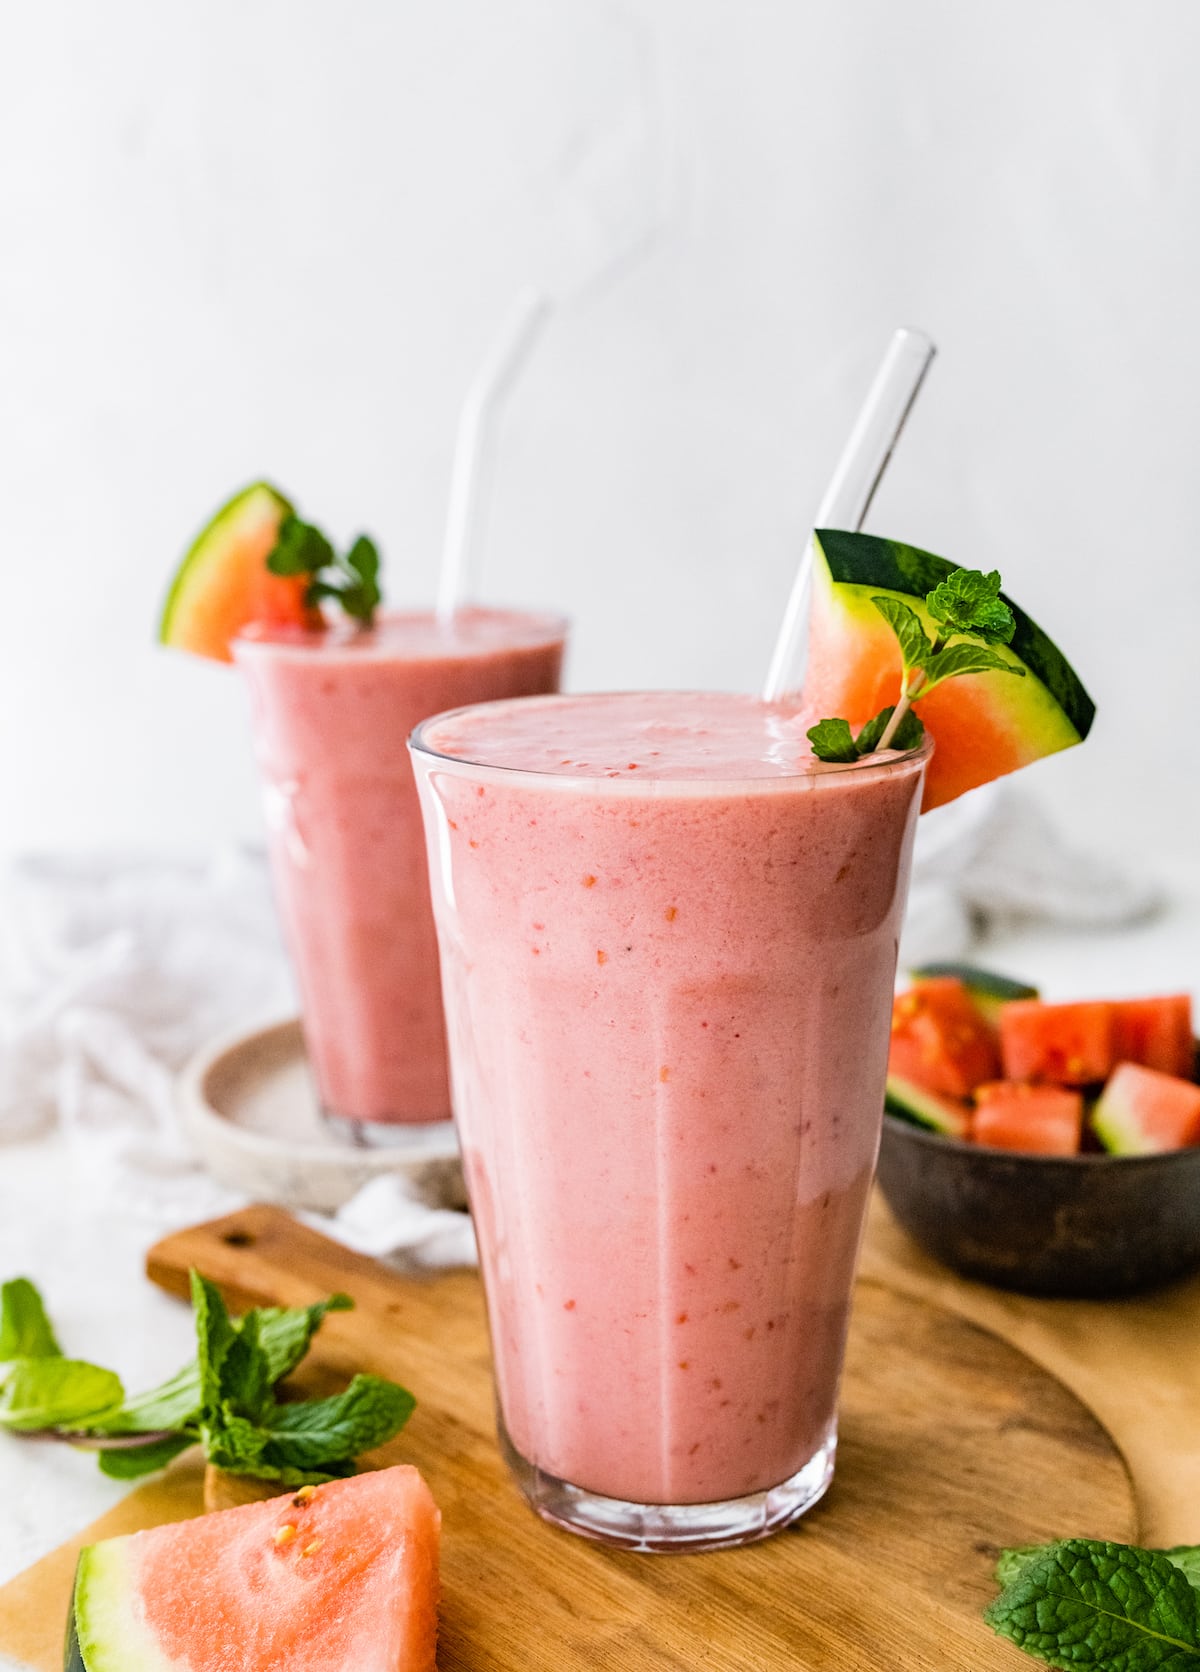 Two watermelon smoothies with straws and fresh watermelon slices.